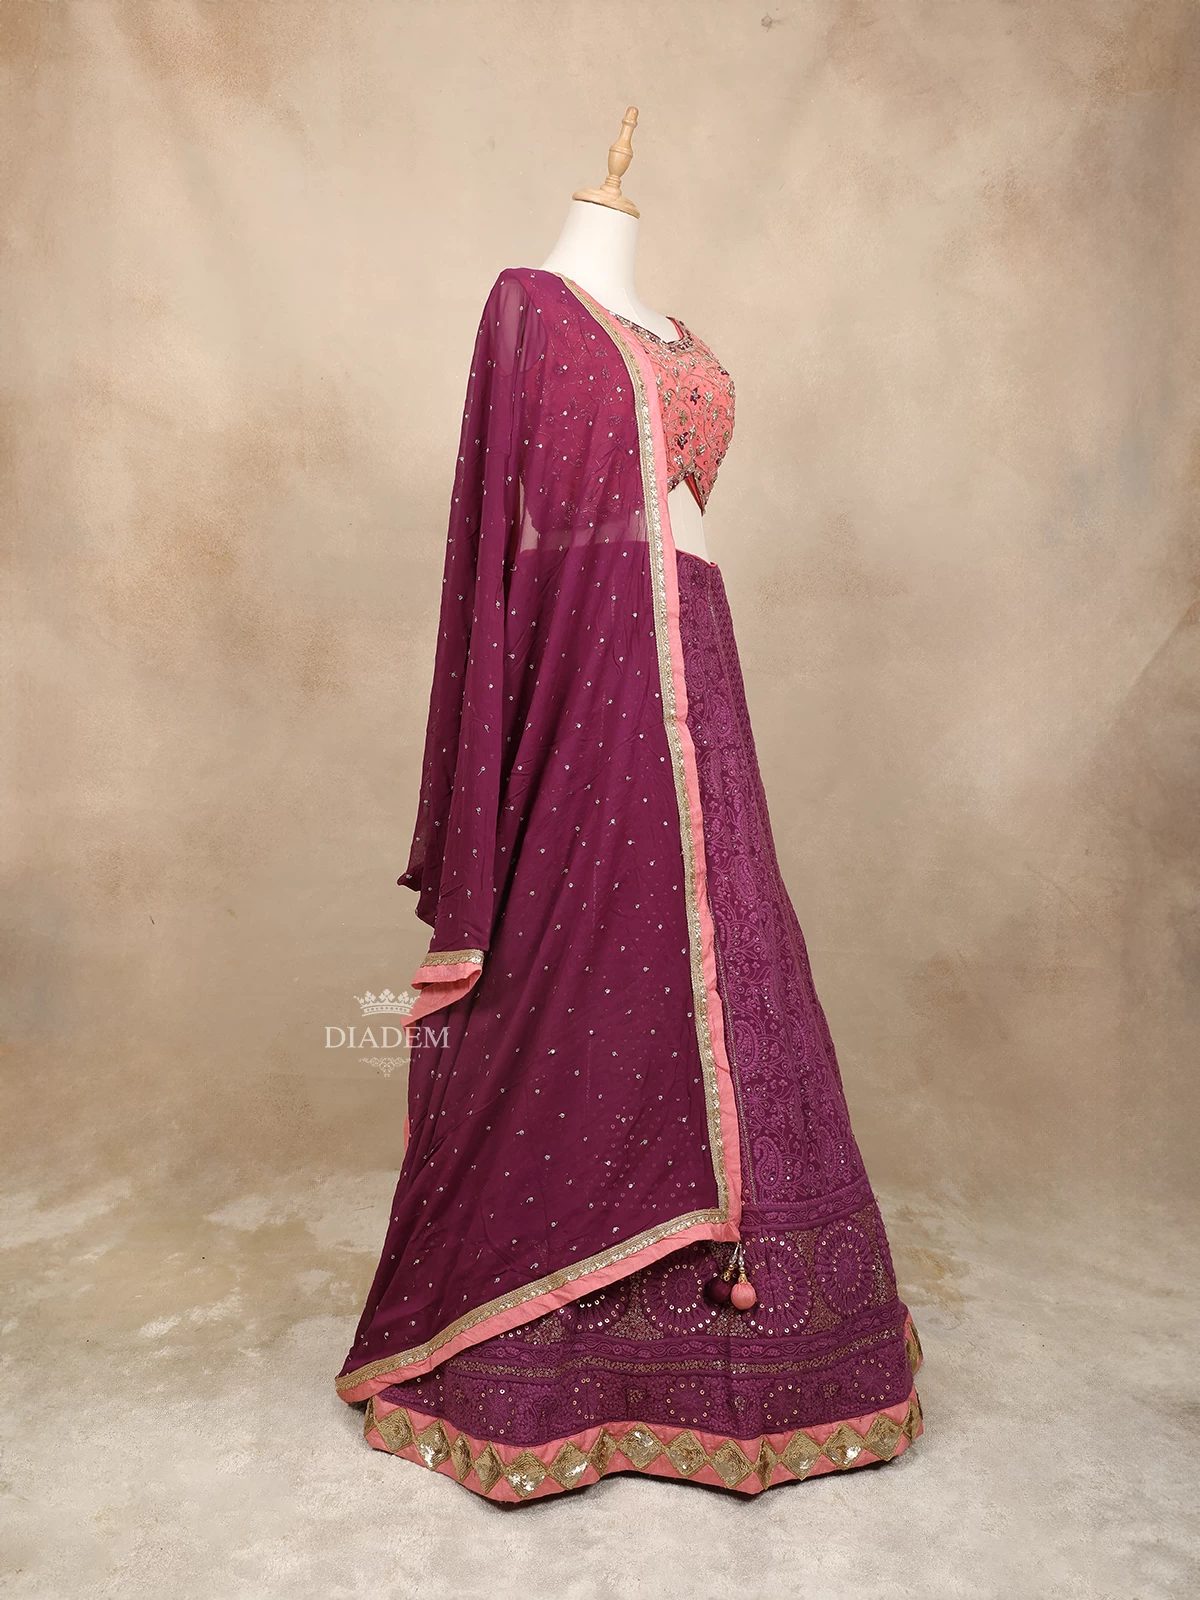 Purple Silk Bridal Lehenga Adorned With Floral Threadwork Embroidery And Beads, Paired With Dupatta